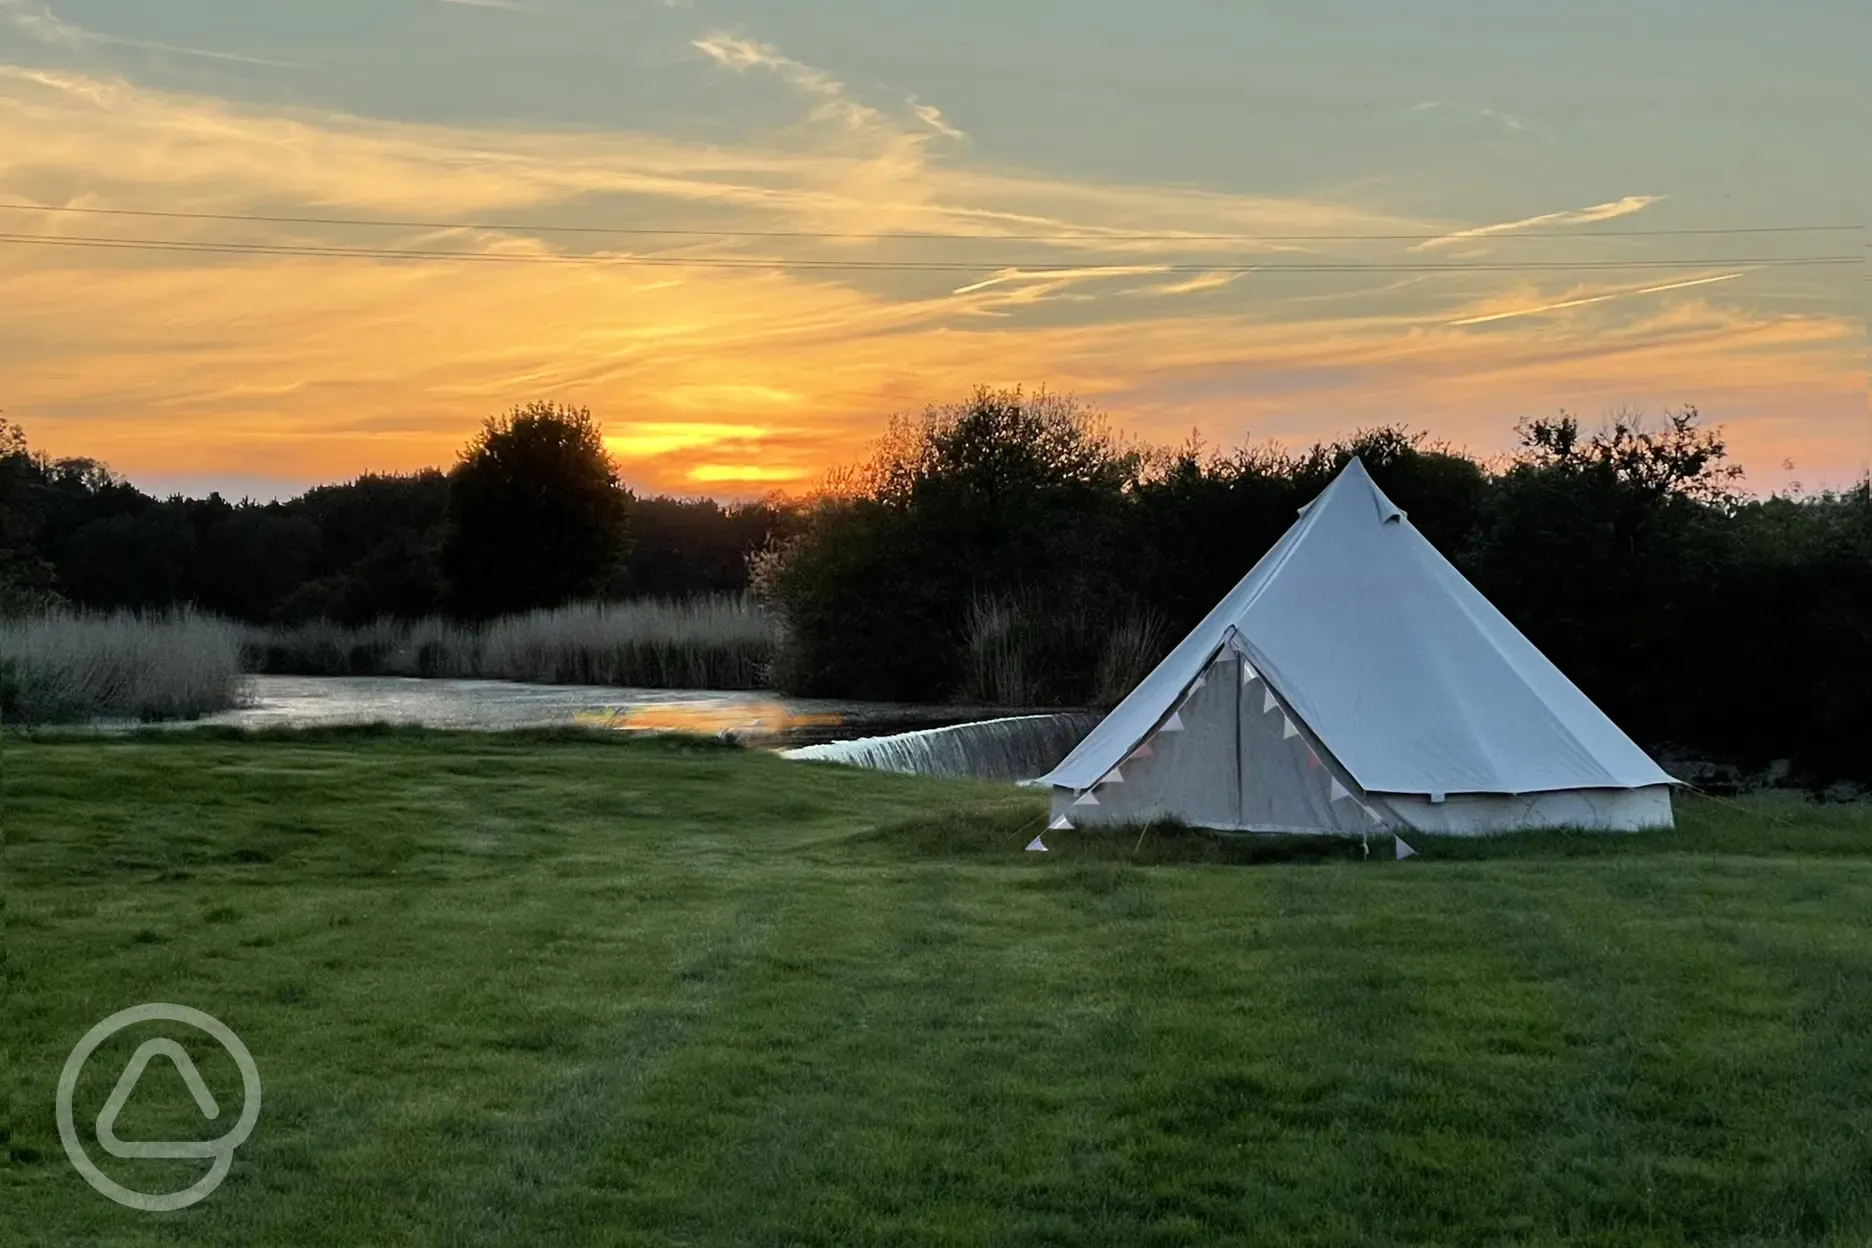 One of our bell tents